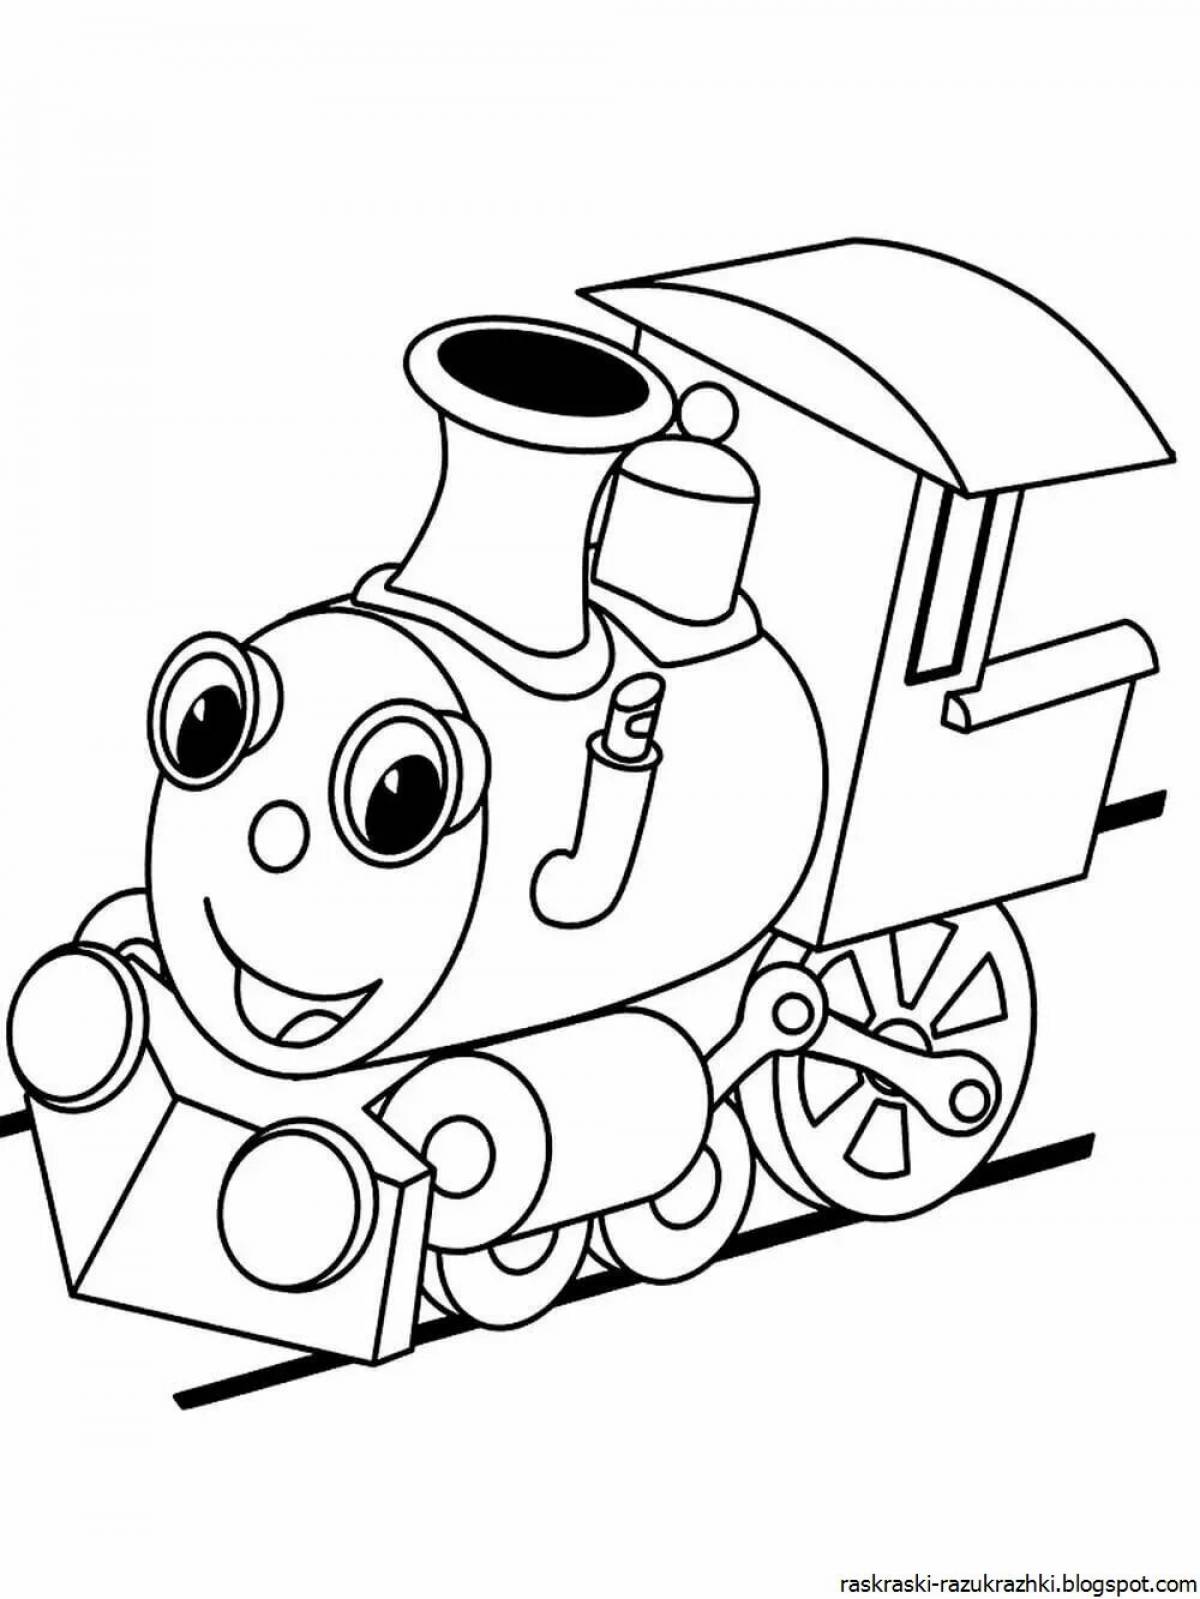 Glitter train coloring book for preschoolers 2-3 years old